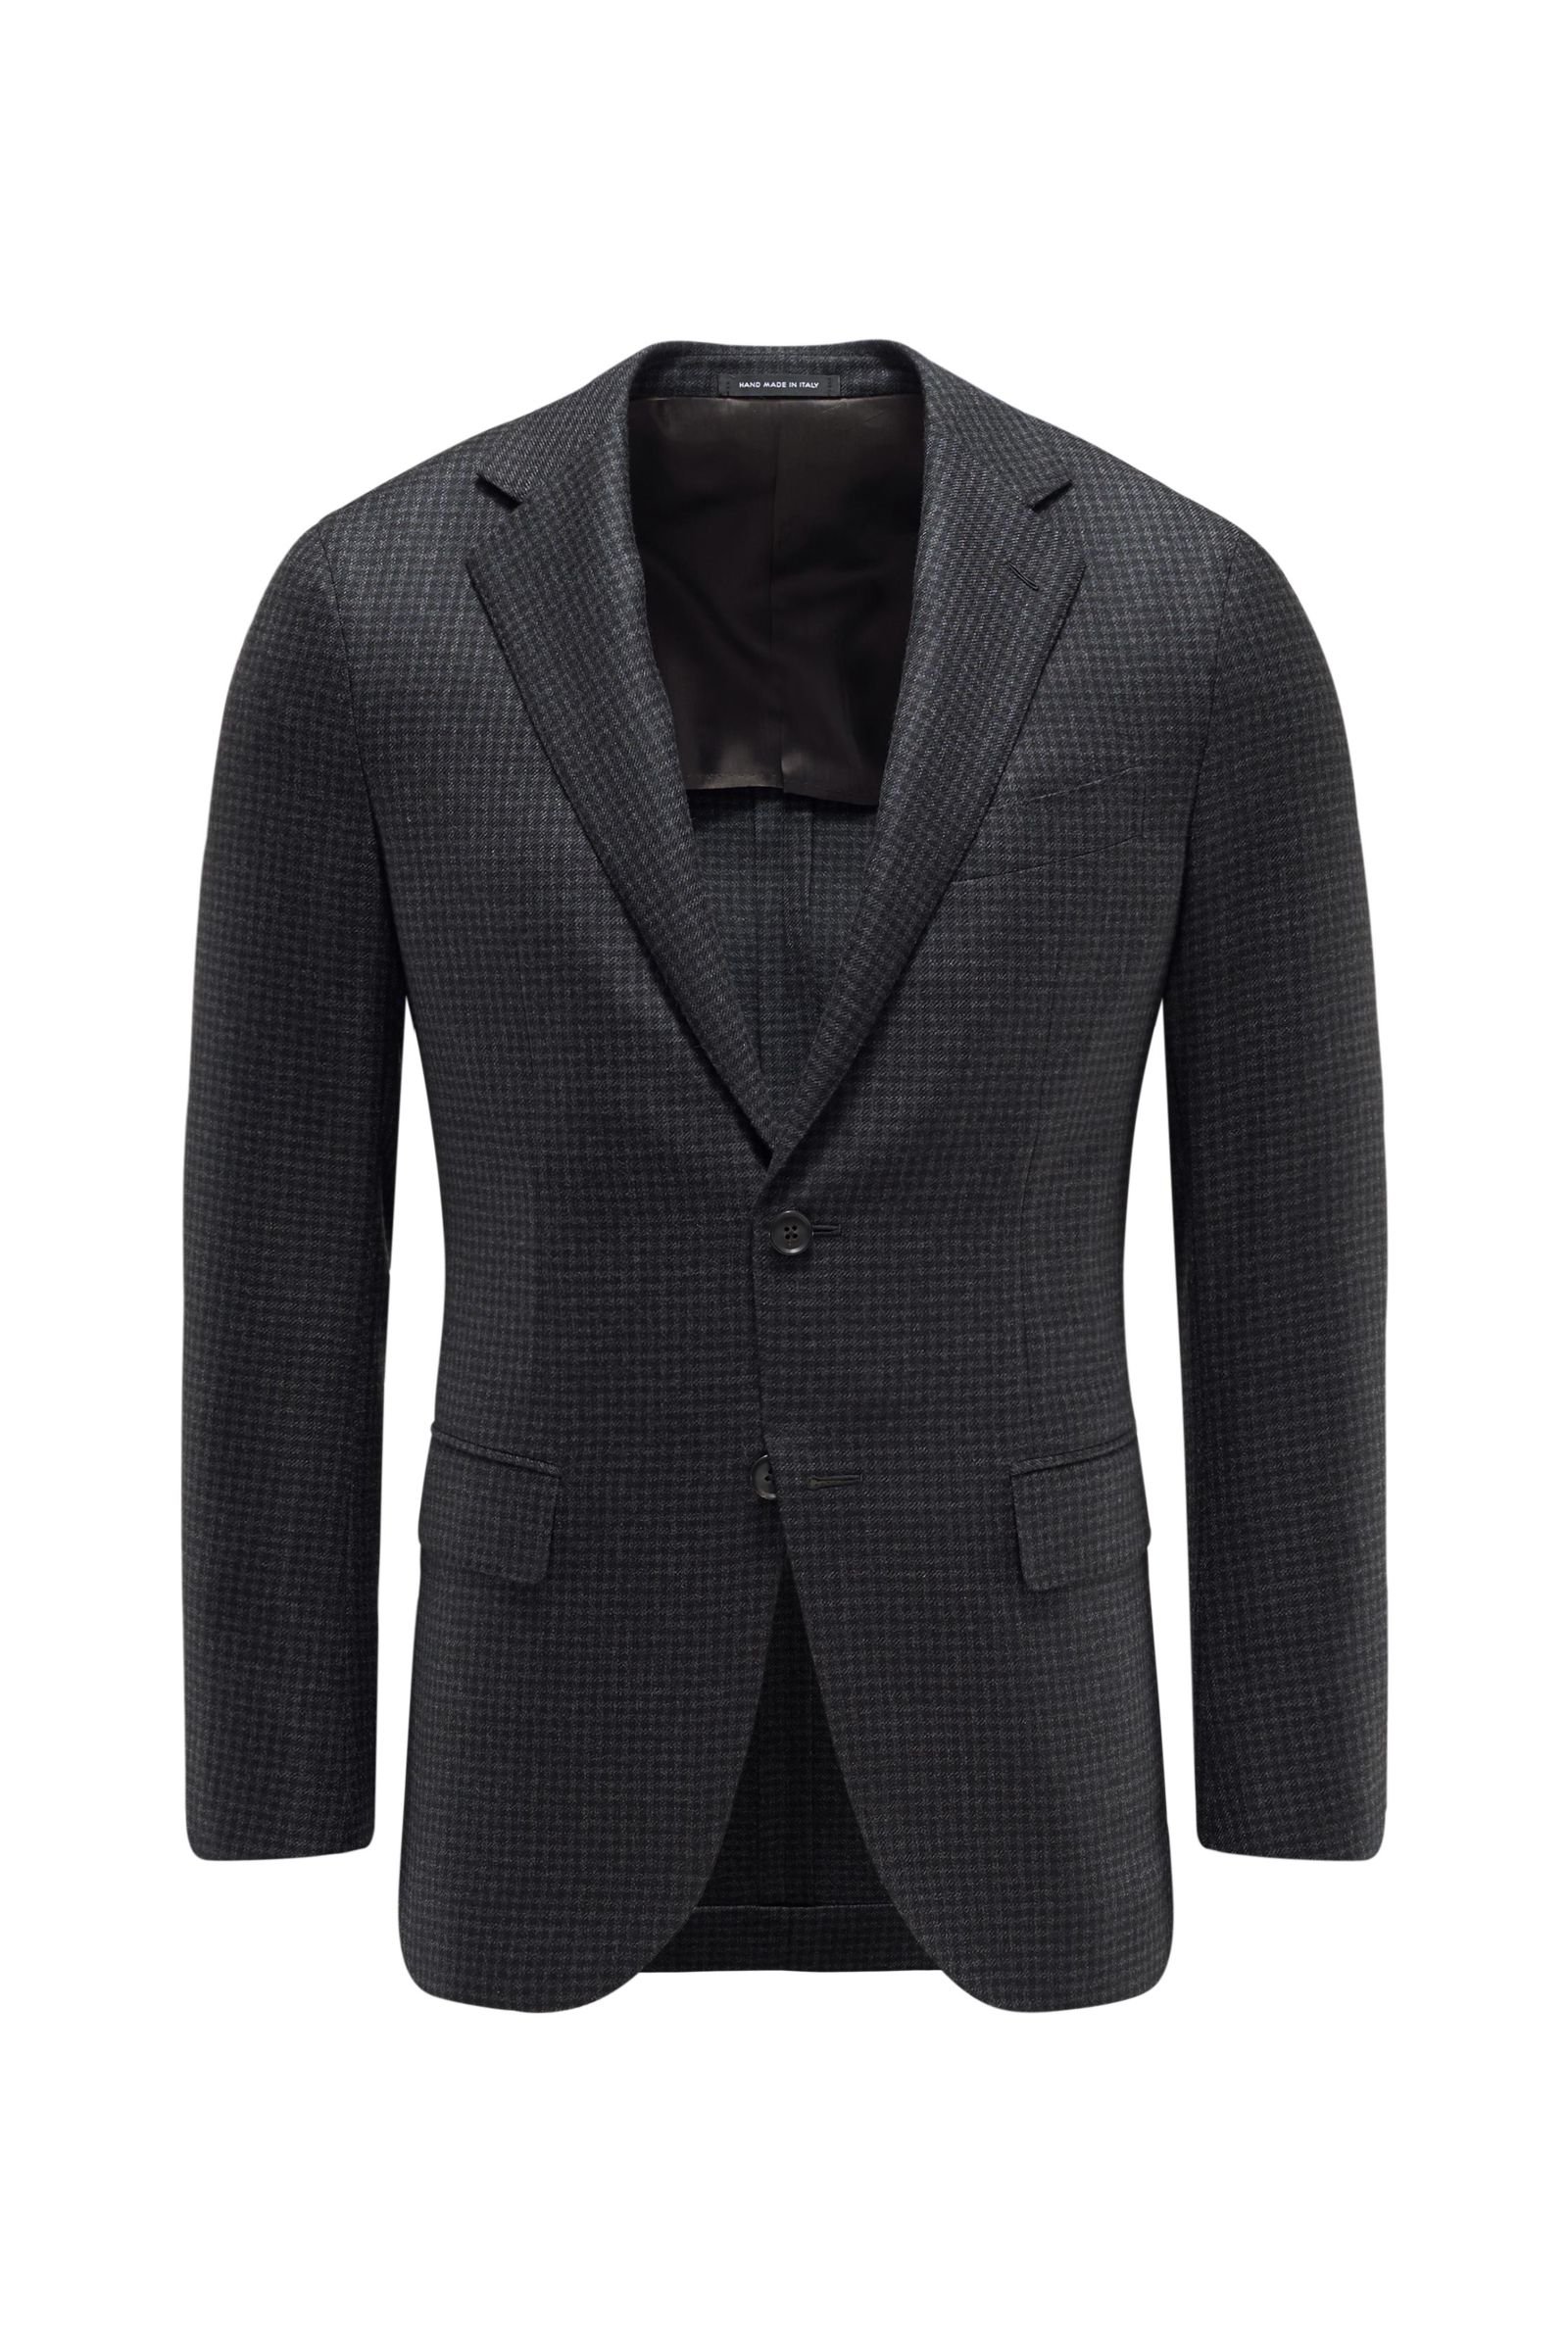 Smart-casual jacket anthracite/black checked